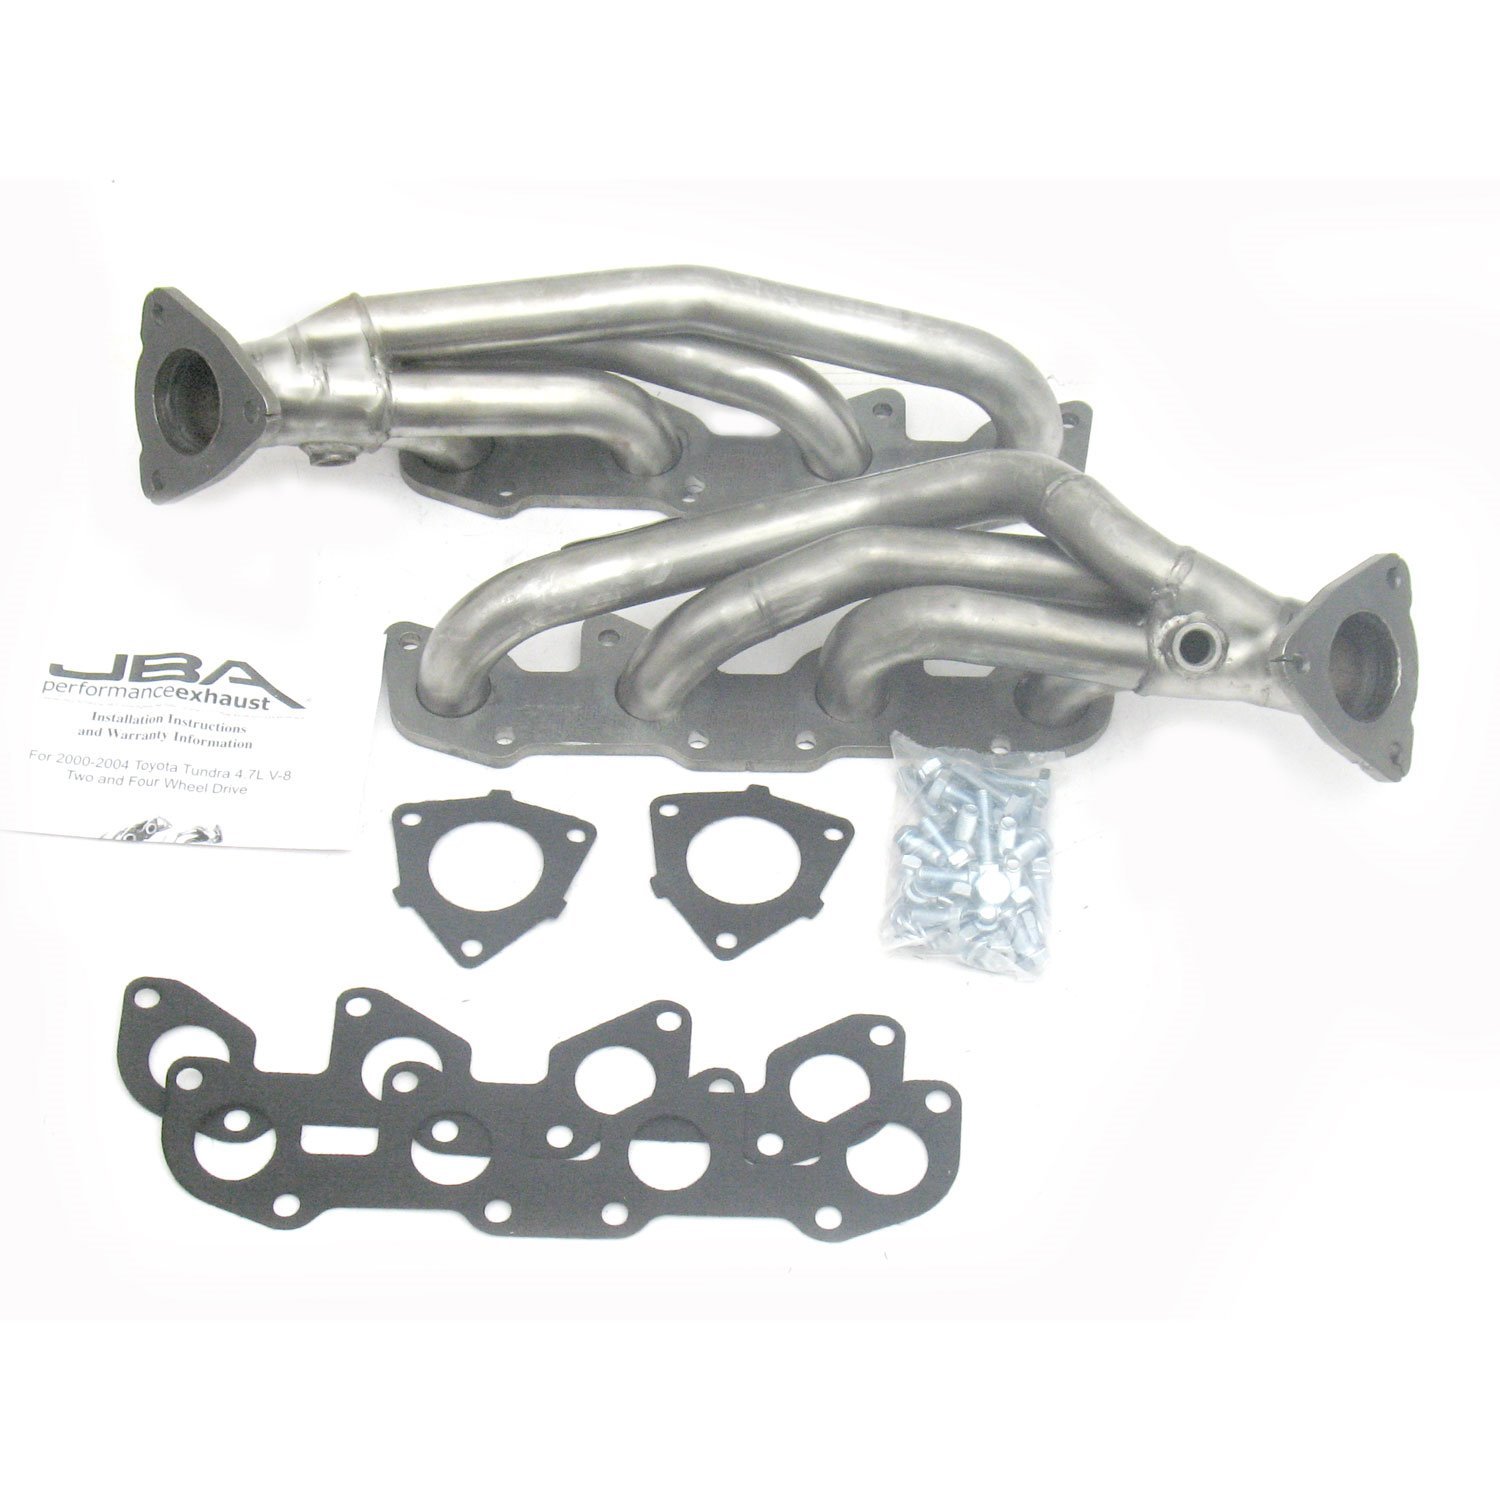 2010S Shorty Headers for 2000-2004 Toyota Tundra, Sequoia 4.7L V8 Engine [2WD/4WD]